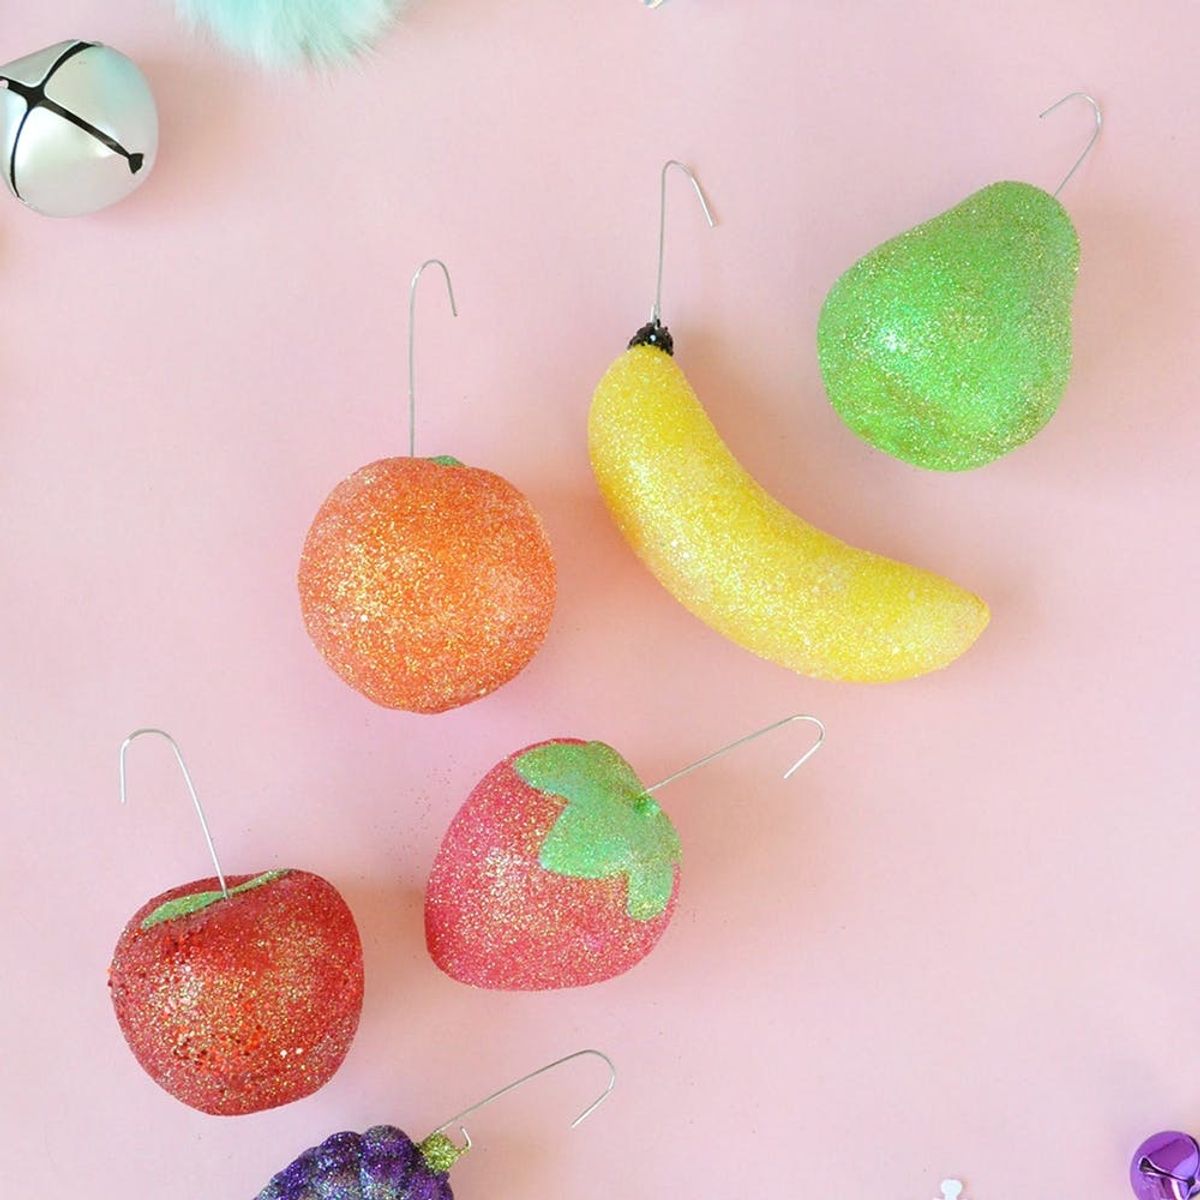 These DIY Glitter Fruit Ornaments Are Almost Good Enough to Eat